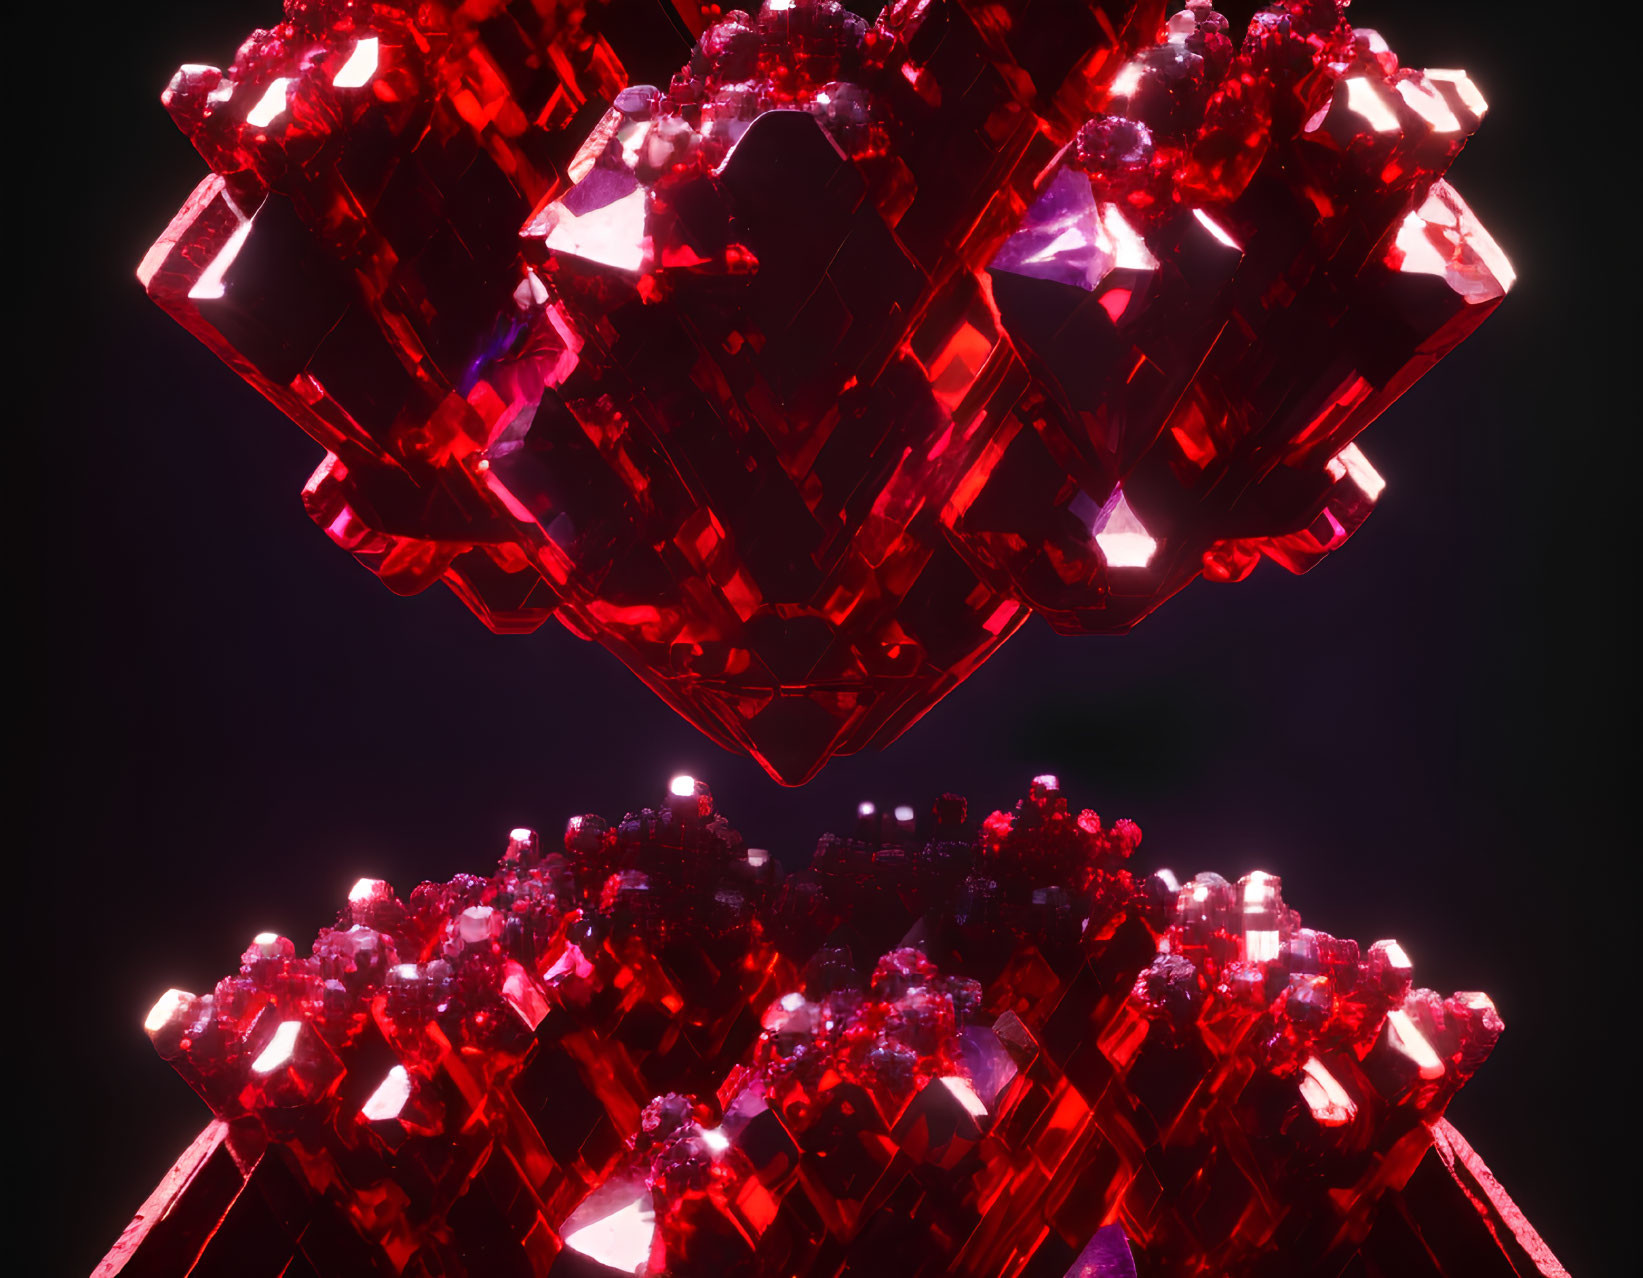 Symmetrical abstract design with red glowing crystals on dark background